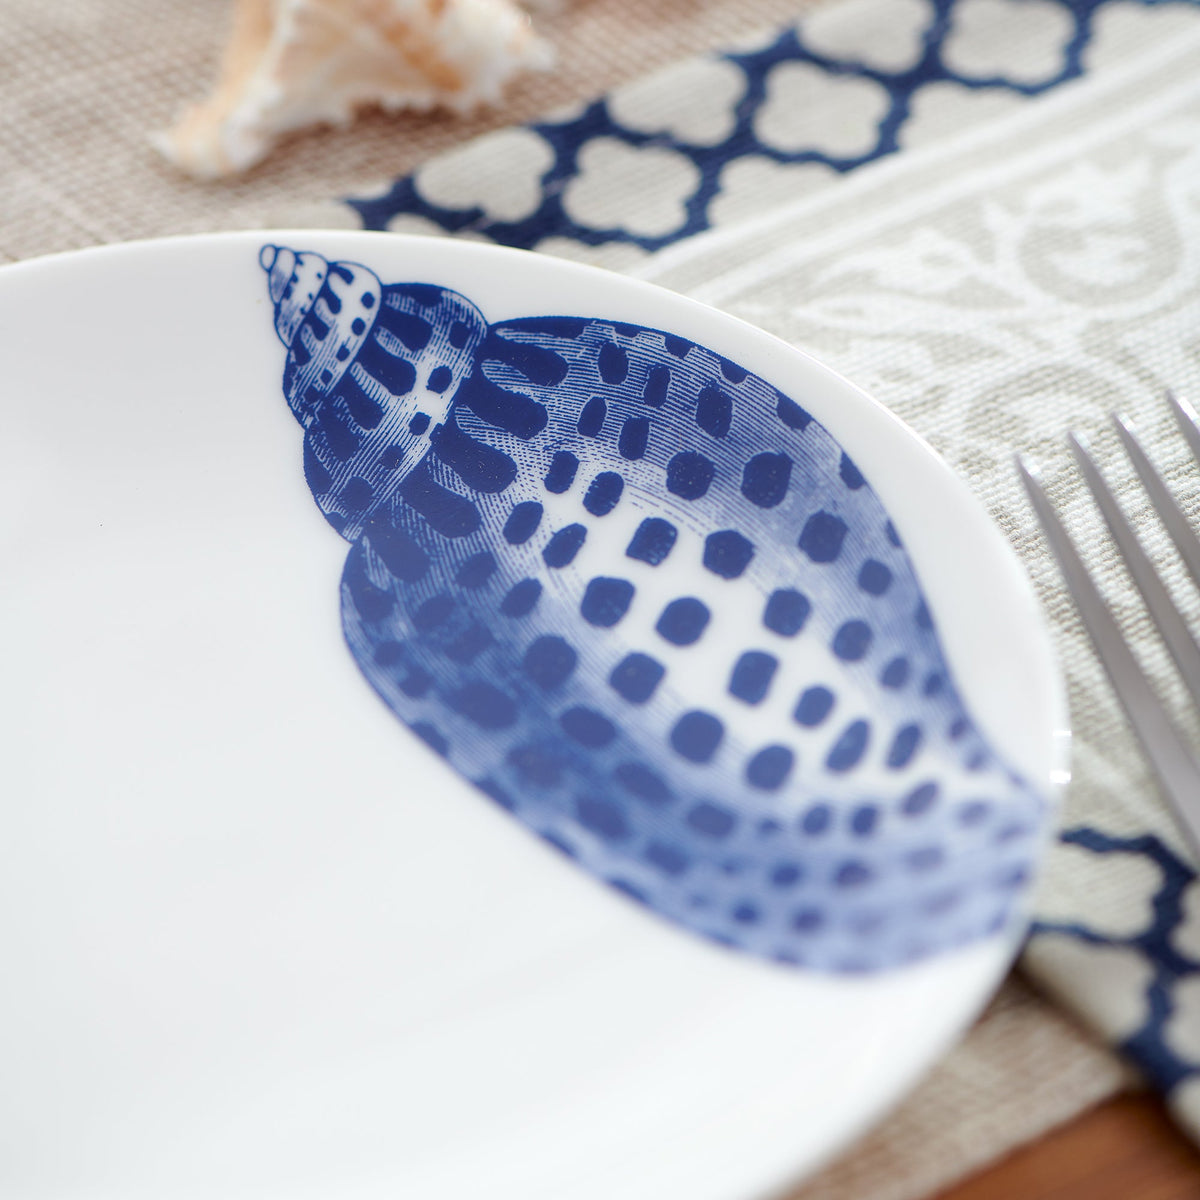 A Shells Canapé Plates by Caskata Artisanal Home, beach-inspired blue and white porcelain plate with a seashell on it.